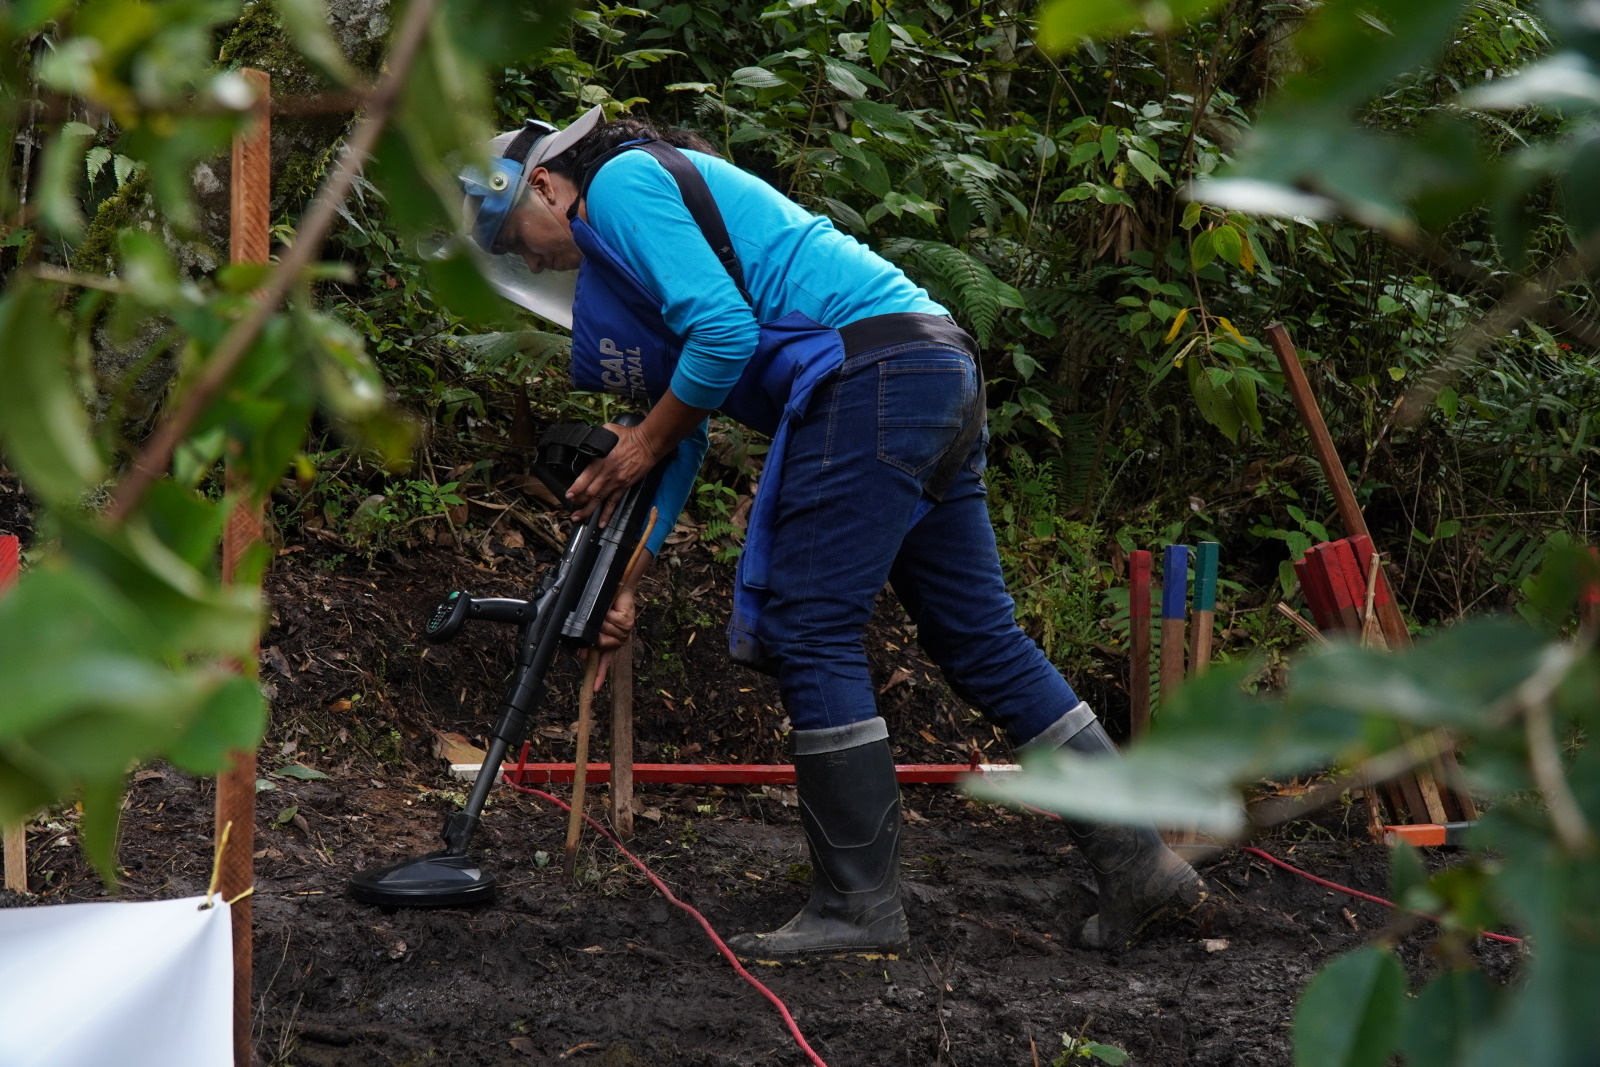 A deminer wearing a uniform and protective gear at work on a plot of land